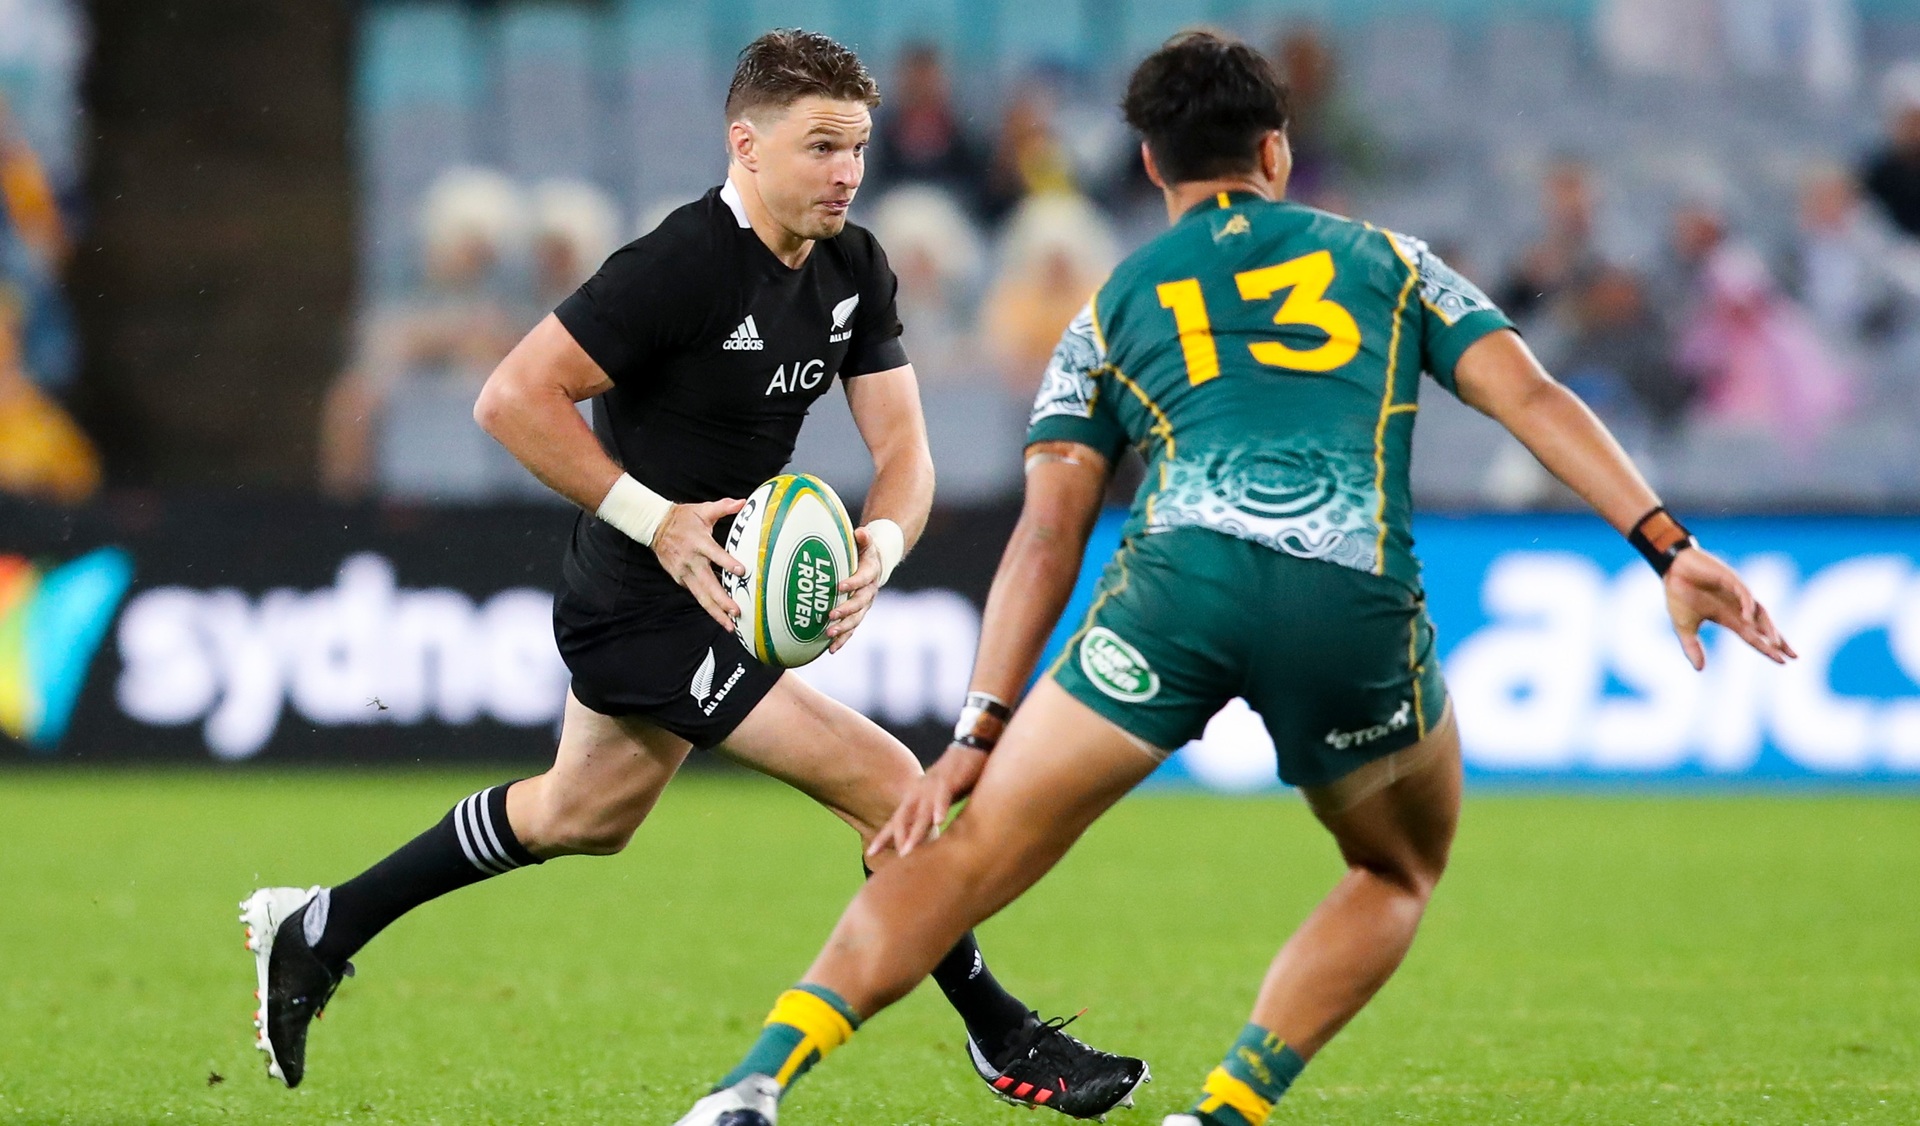 Bledisloe Cup rugby All Blacks v Australia Wallabies in Brisbane - teams, kick-off time, live streaming and how to watch